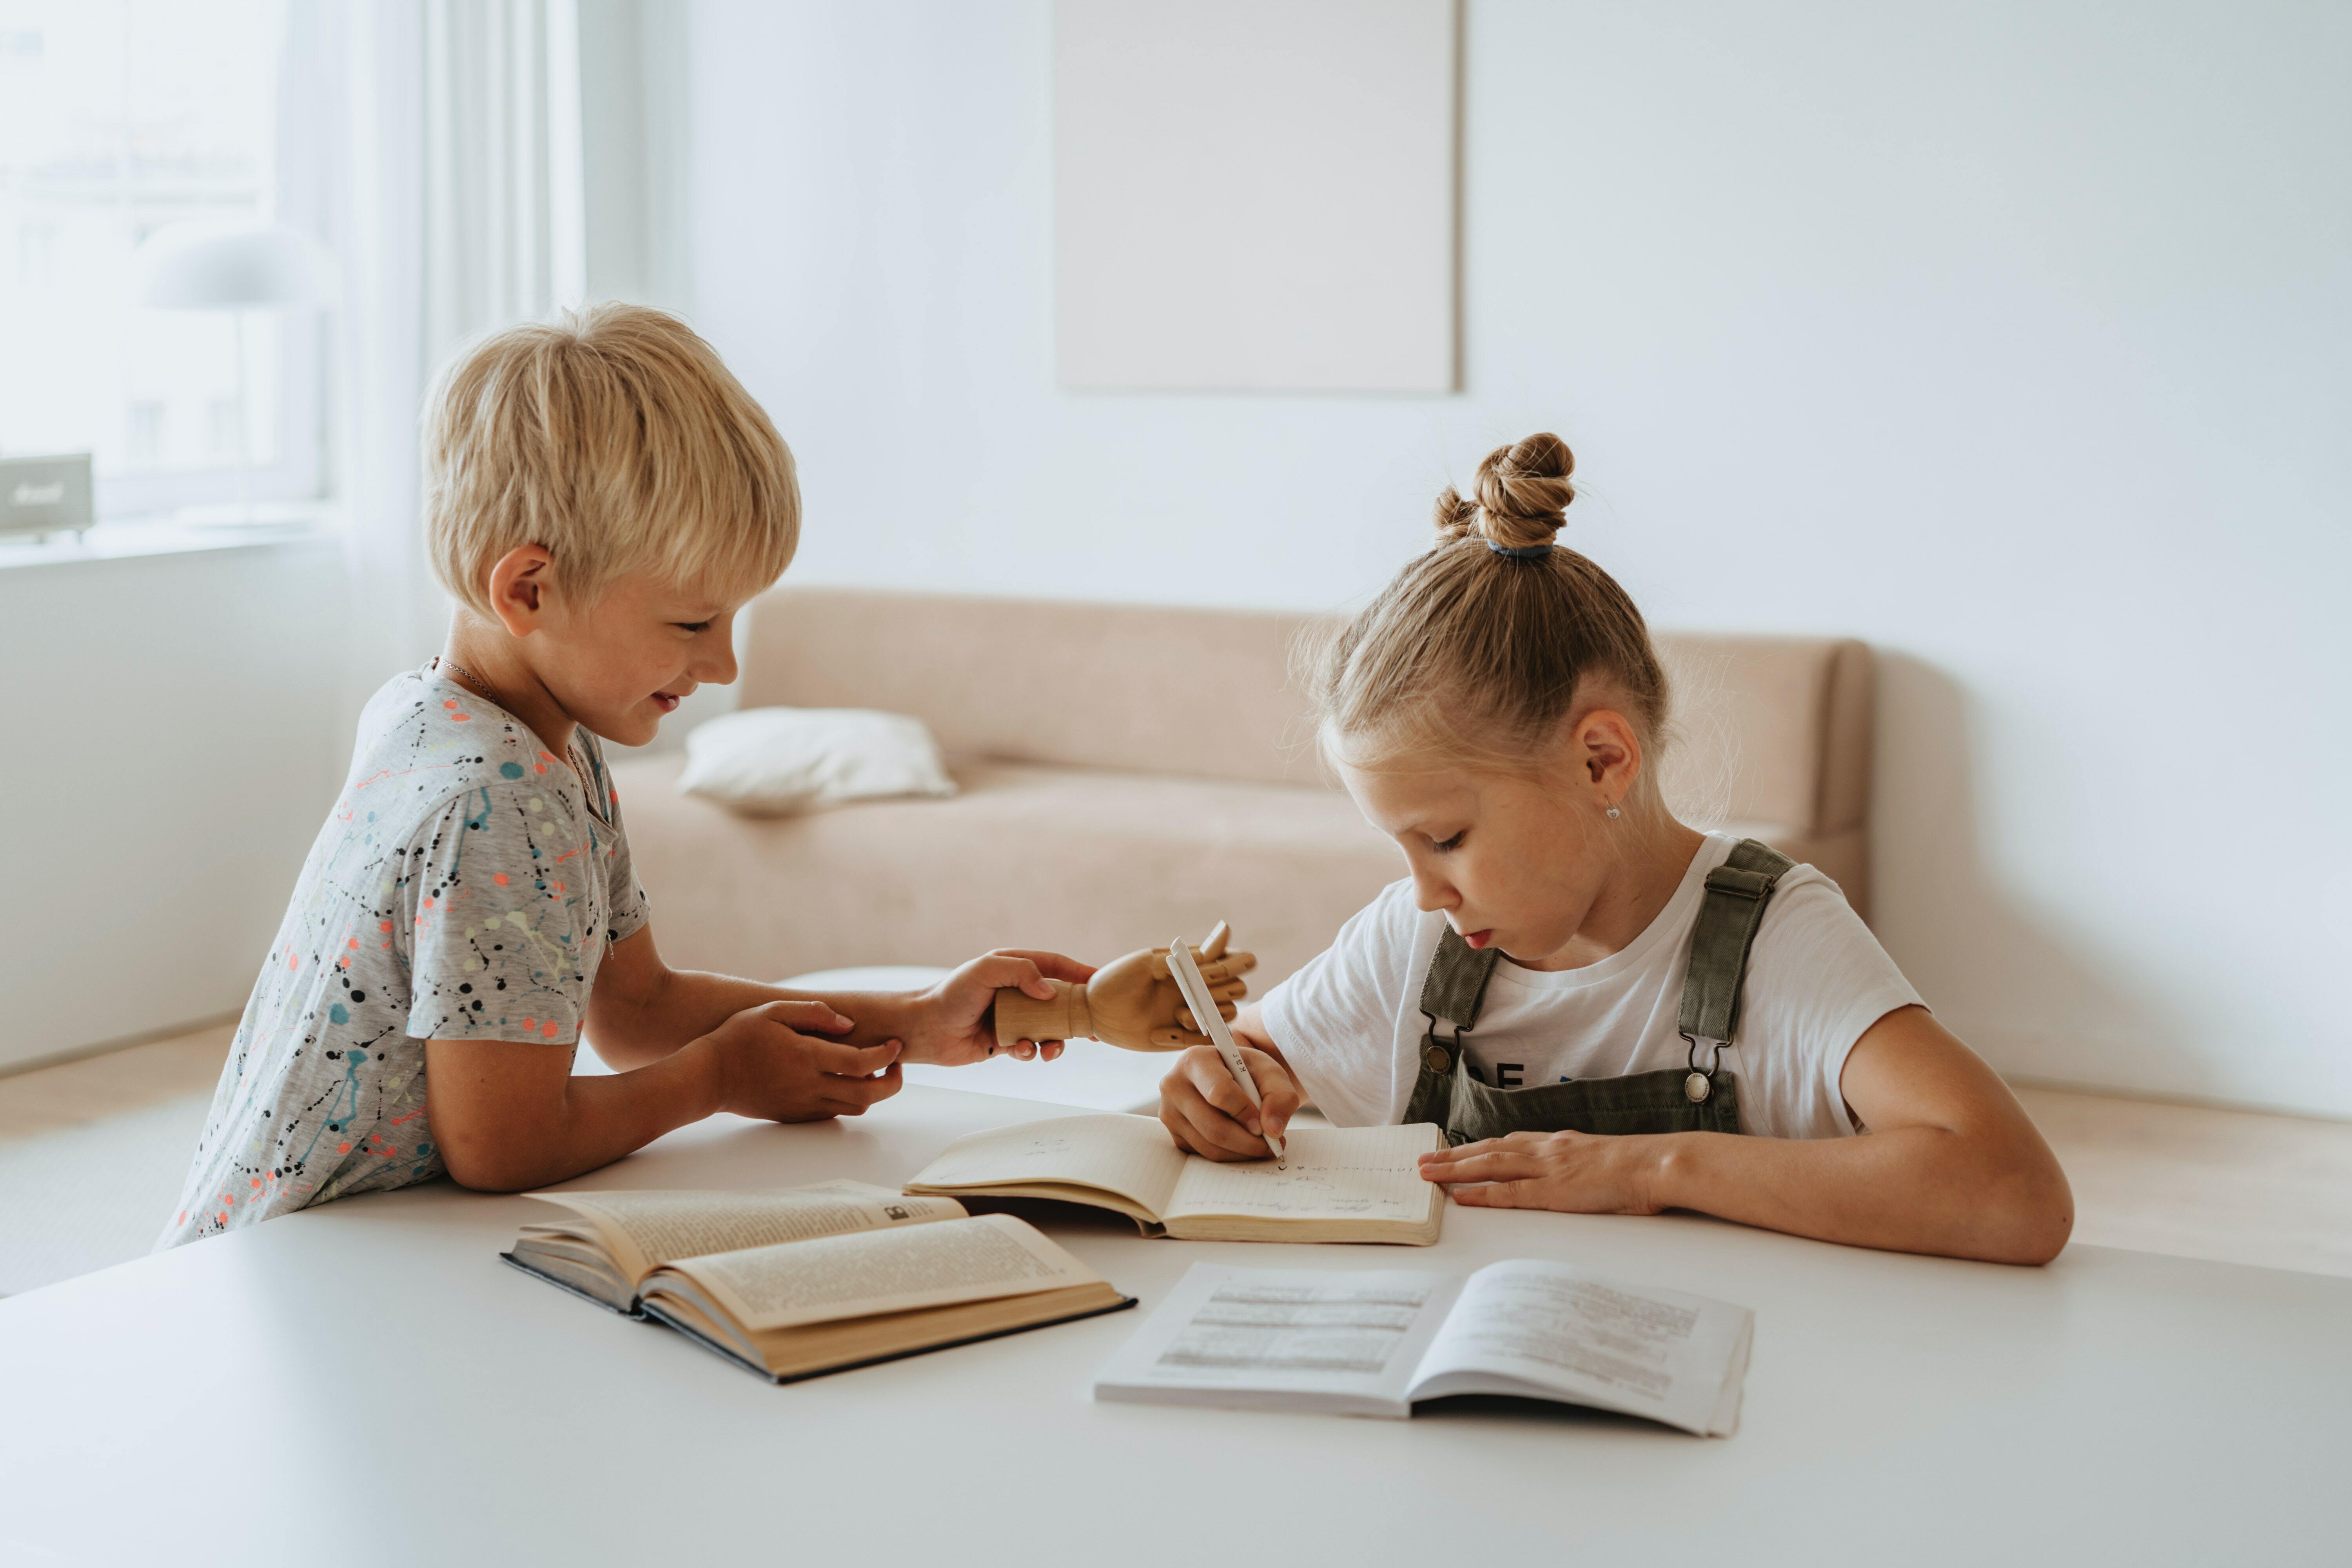 Two children writing on a table